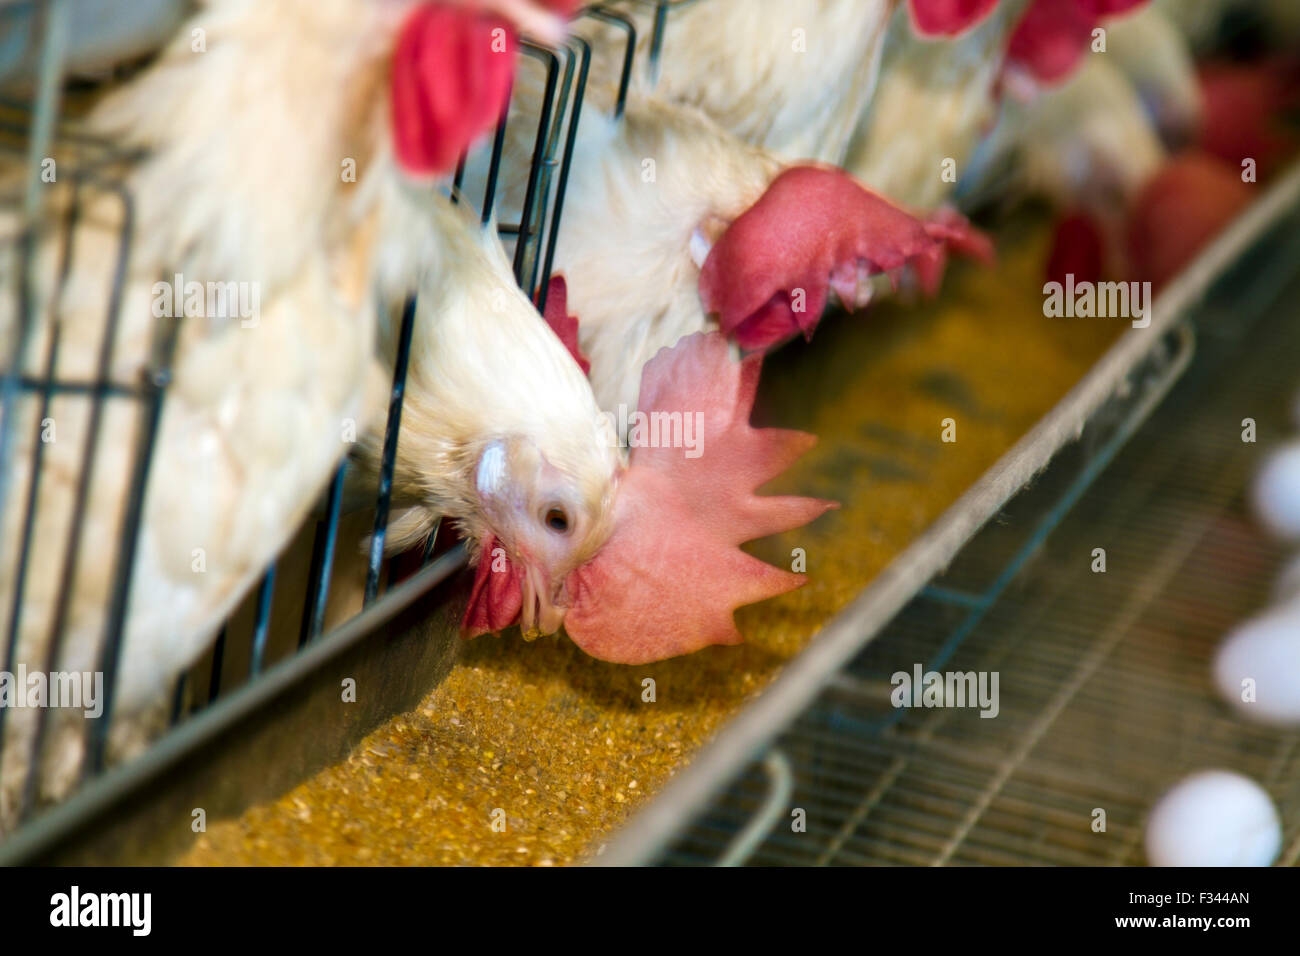 white chickens farm in cell sections Stock Photo